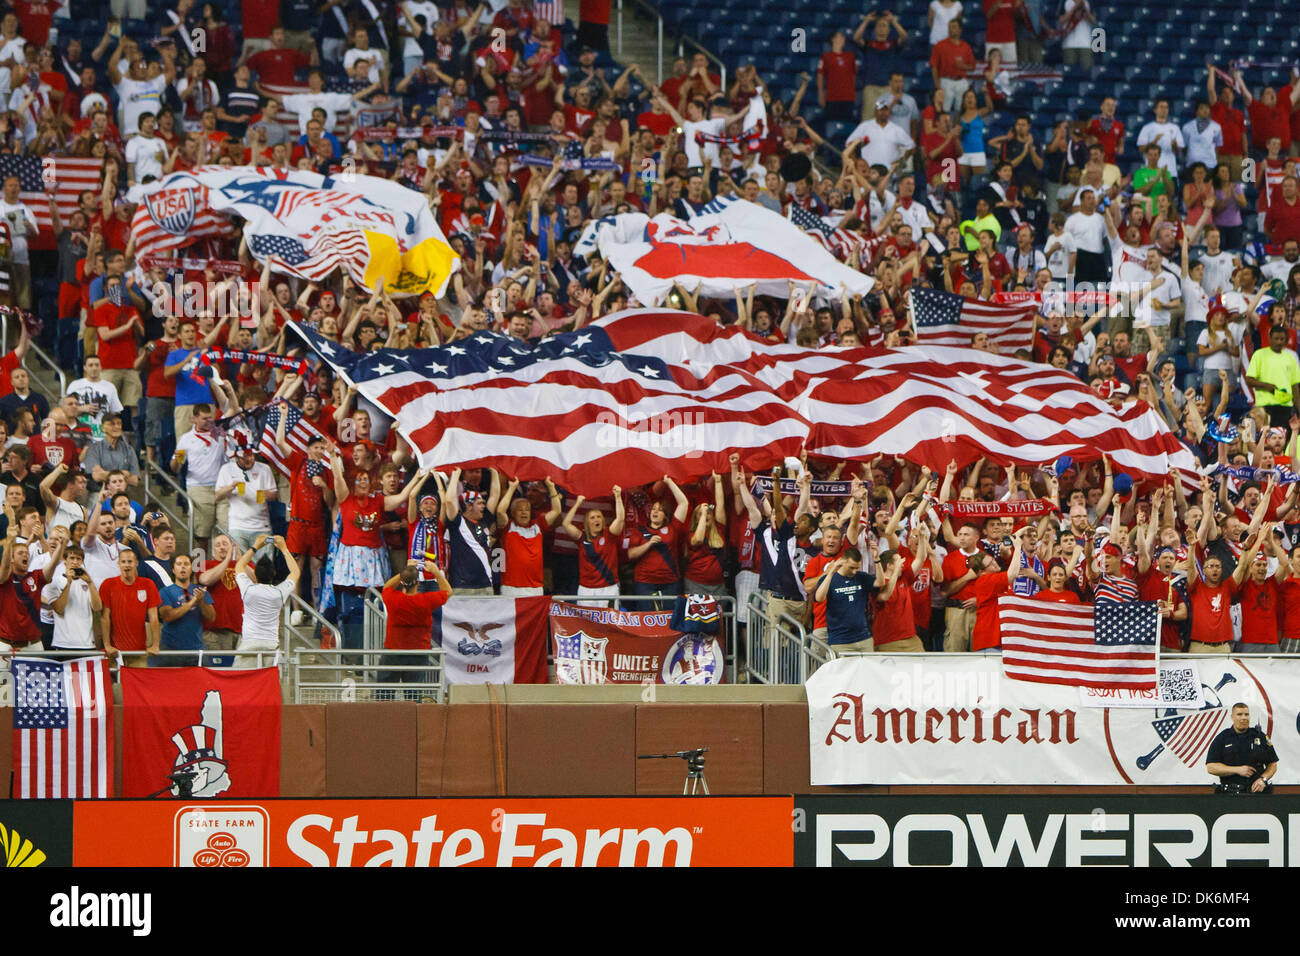 June 7, 2011 - Detroit, Michigan, U.S - Supporters display a large American flag during the playing of the United States national anthem prior to the start of the match.  The United States defeated Canada 2-0 in the second match of the Group C-play opening round doubleheader of the 2011 CONCACAF Gold Cup soccer tournament played at Ford Field in Detroit, Michigan. (Credit Image: ©  Stock Photo